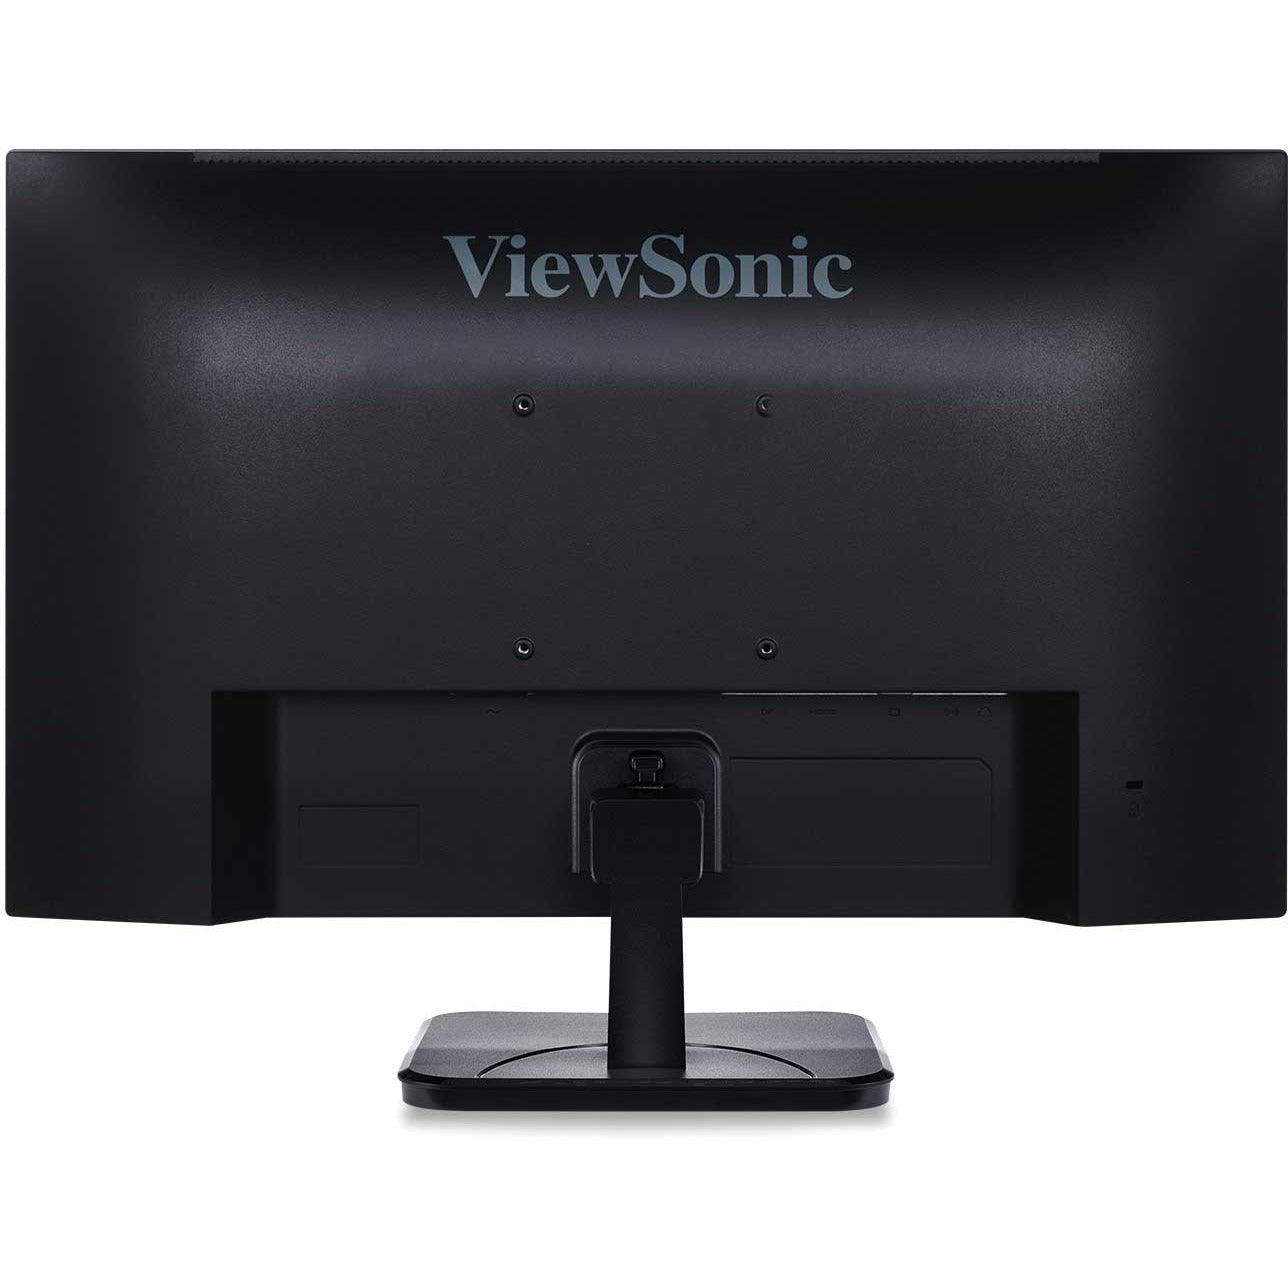 viewsonic-va2256-mhd-22-inch-ips-1080p-monitor-with-ultra-thin-bezels-hdmi-displayport-and-vga-inputs-for-home-and-office-va2256-mhd-ips-1080p-monitor-with-ultra-thin-bezels-hdmi-displayport-and-vga-250-cd-m2-22_vewva2256mhd - 4